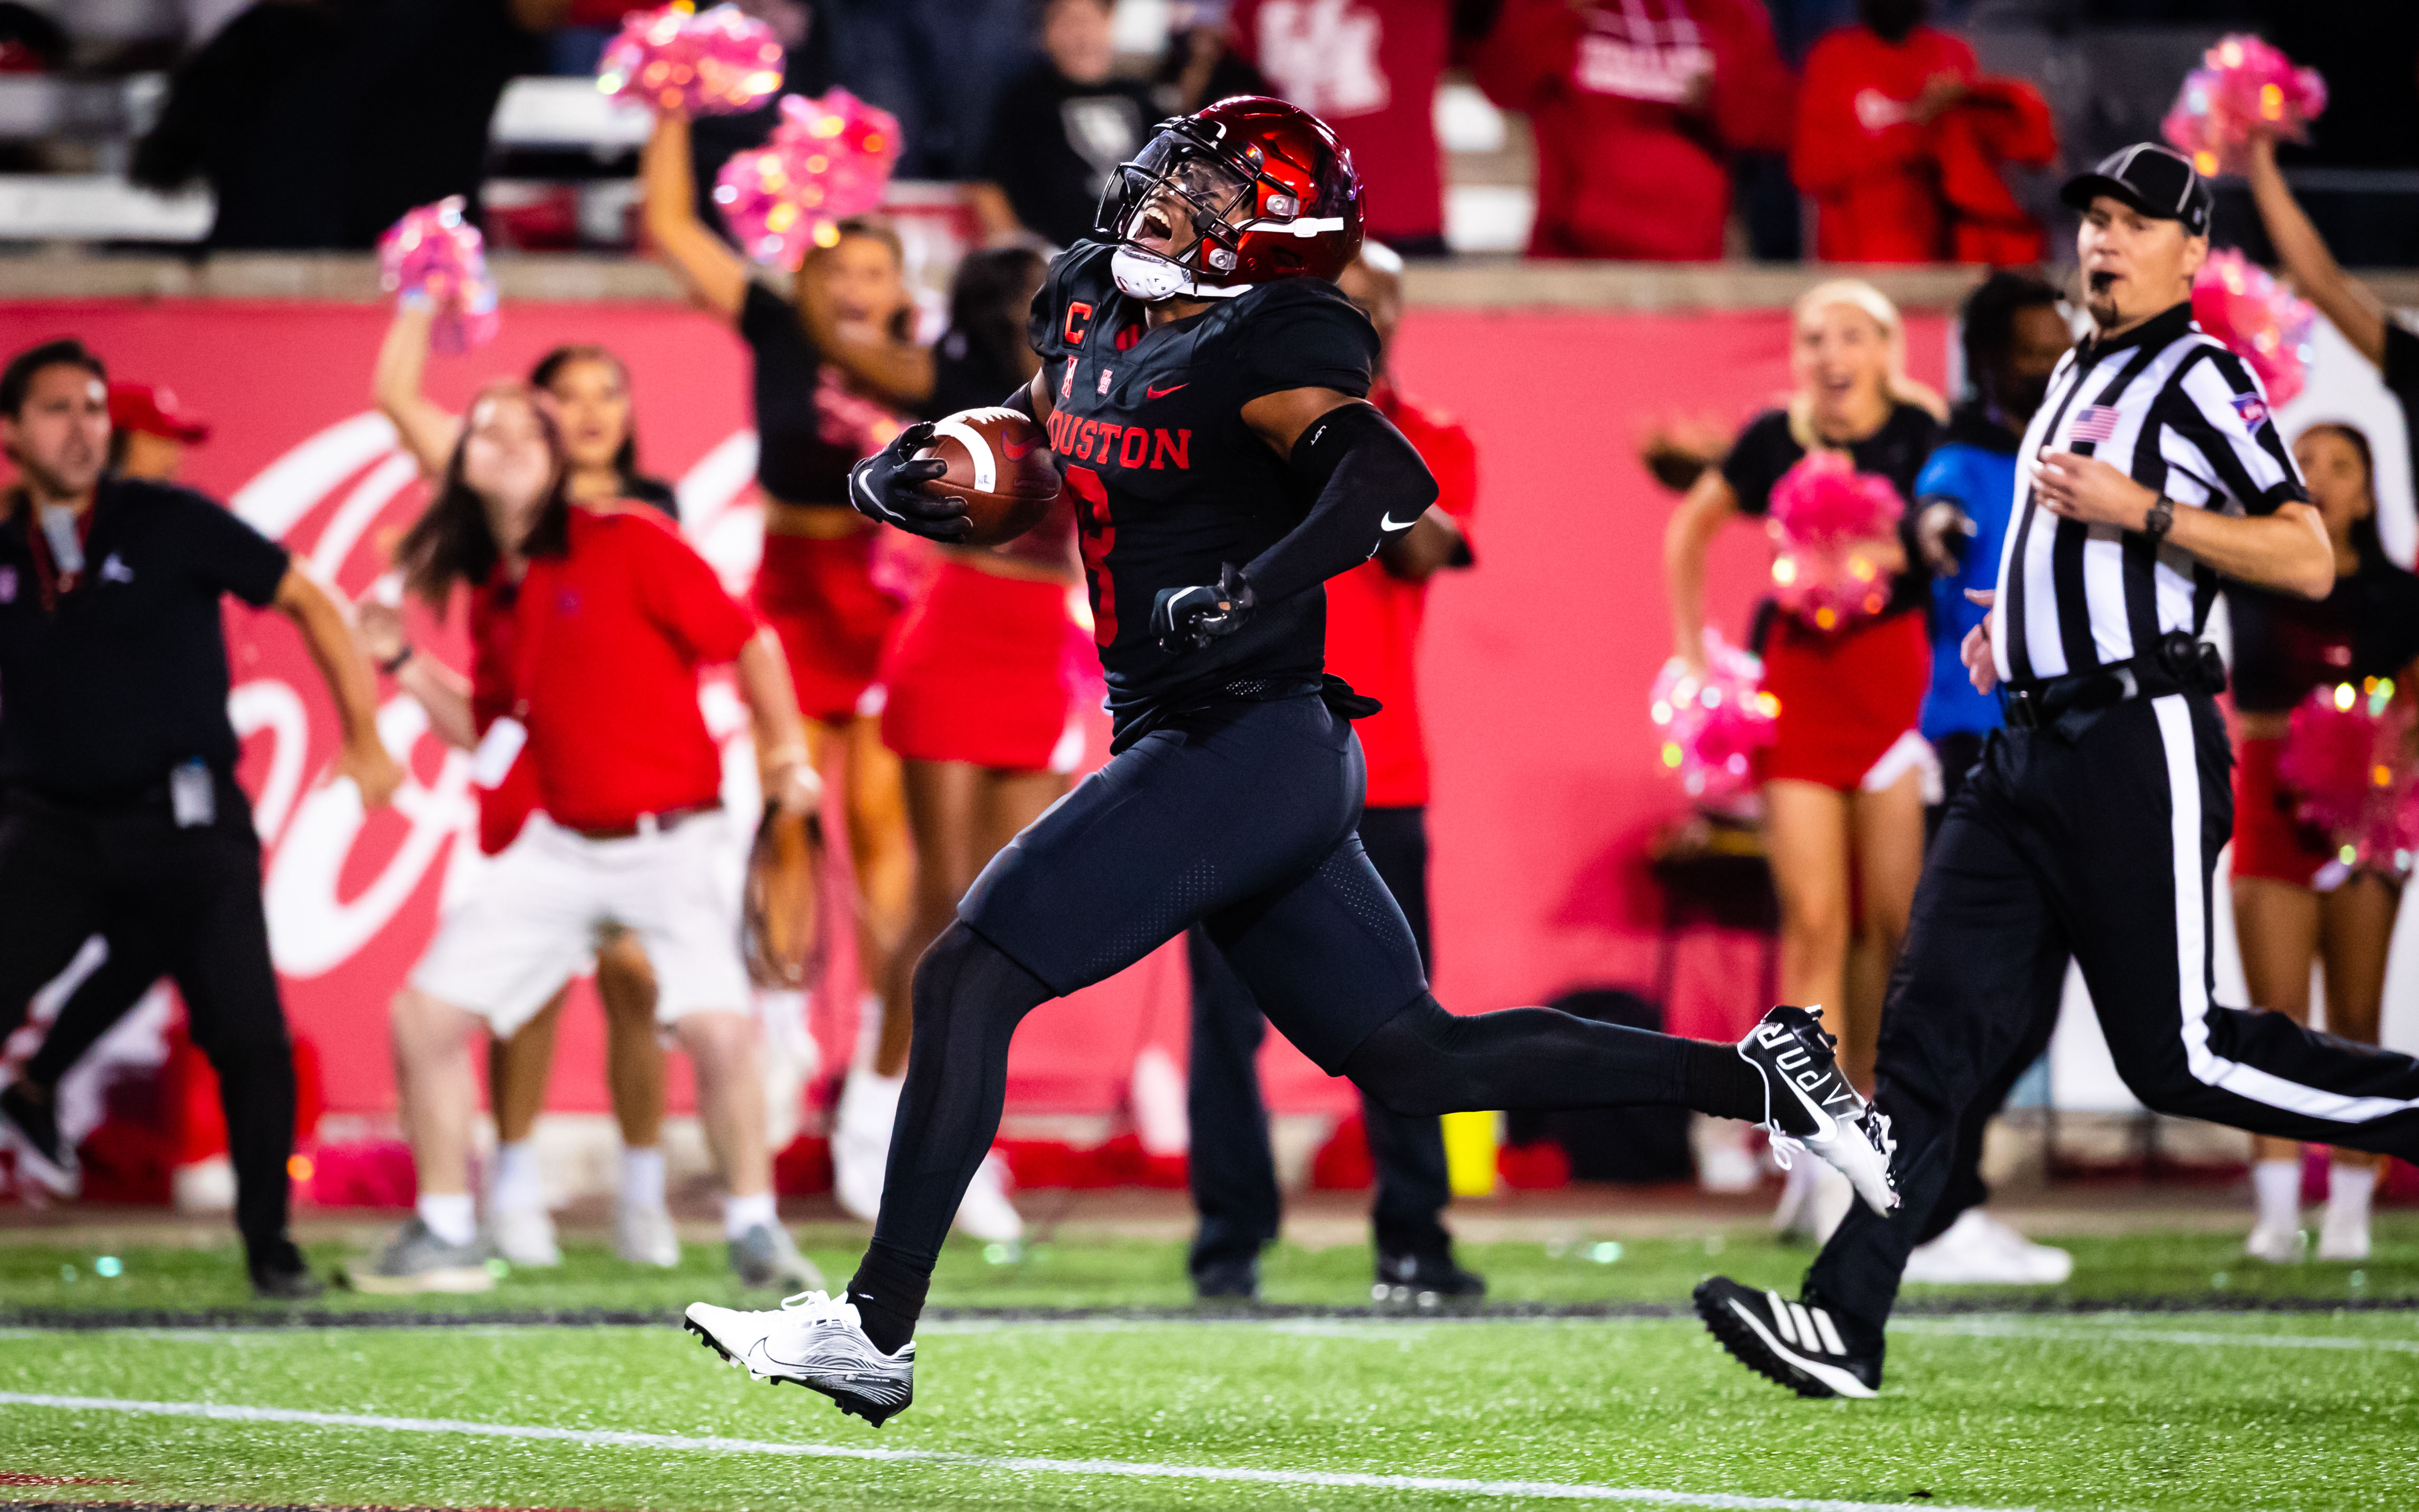 Marcus Jones electrified the TDECU Stadium crowds in the final seconds of the fourth quarter, returning a kickoff 102 yards to power UH over No. 19 SMU on Saturday night. | Courtesy of UH athletics